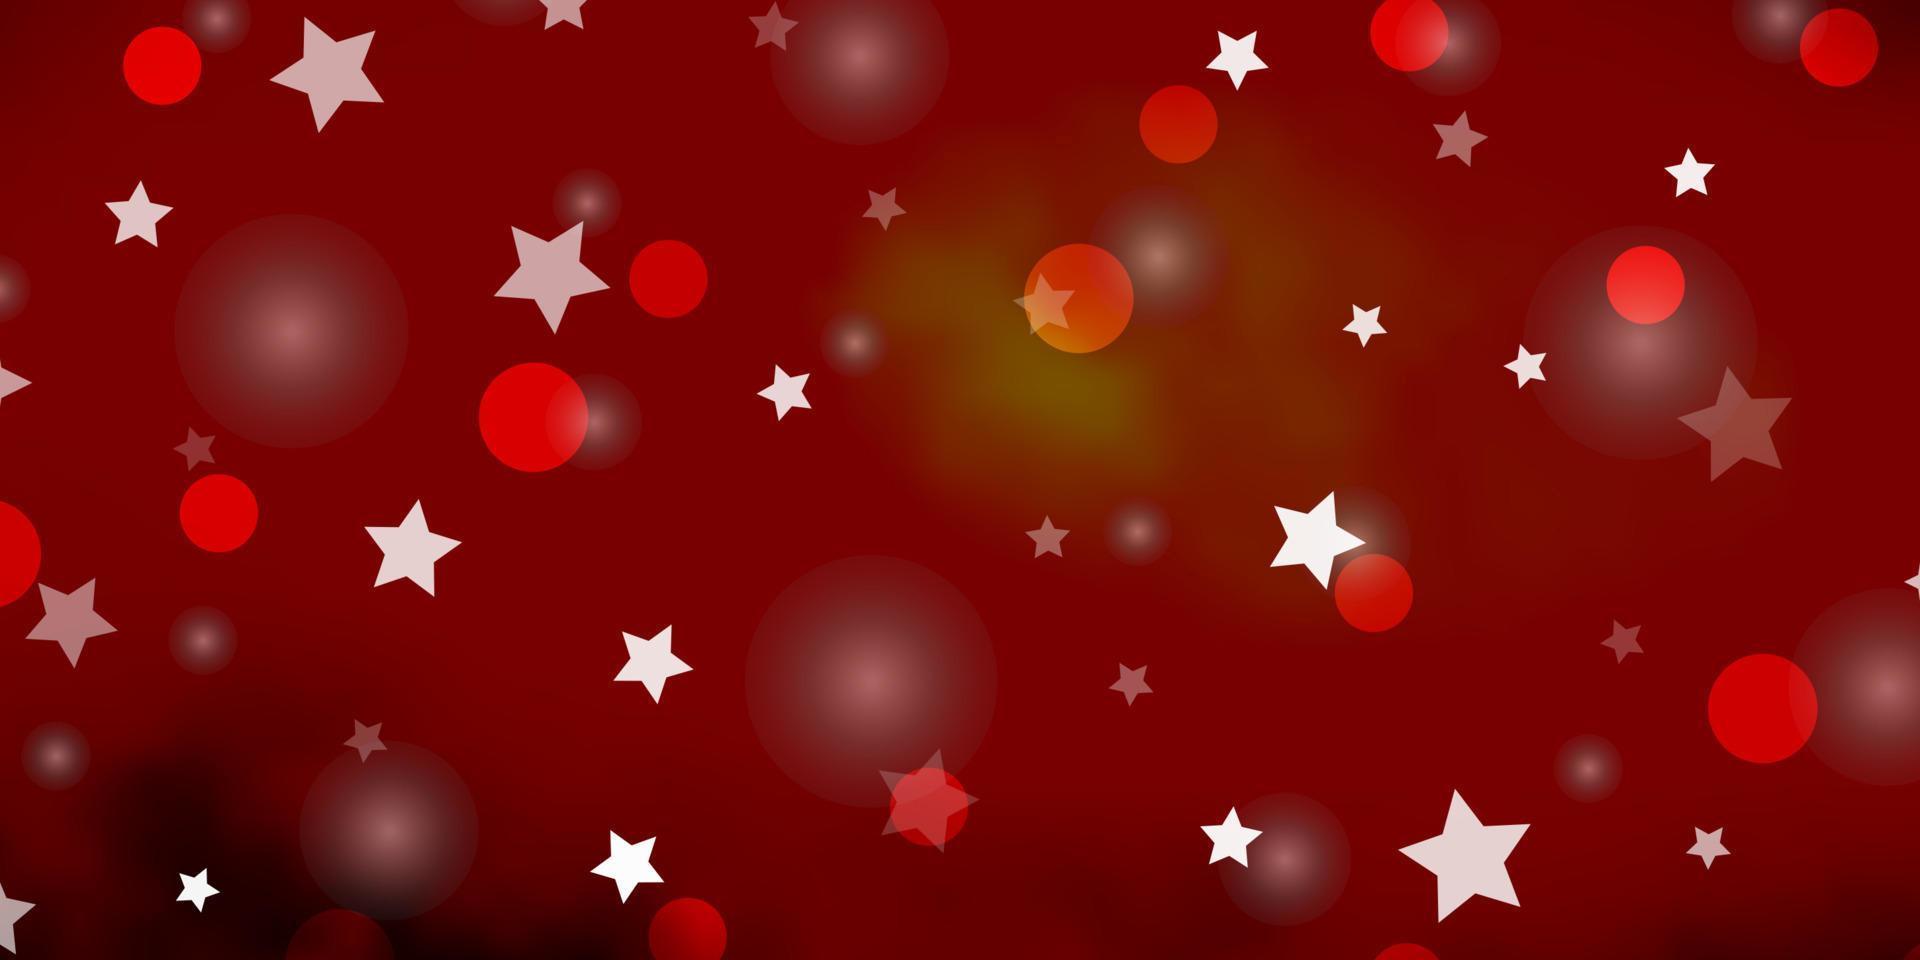 Dark Red, Yellow vector texture with circles, stars.